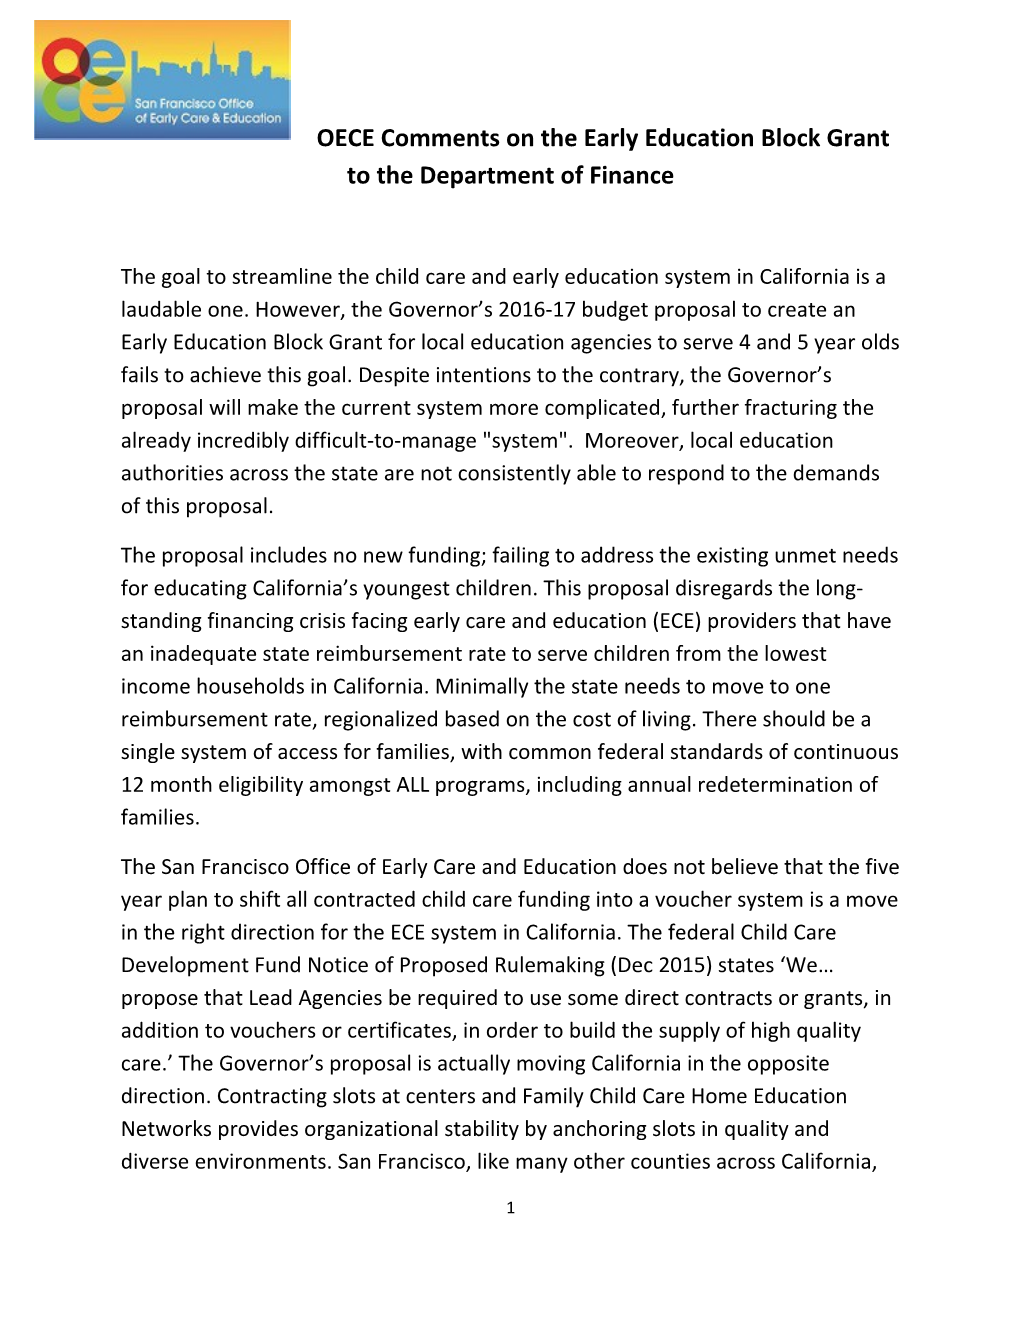 OECE Comments on the Early Education Block Grant to the Department of Finance